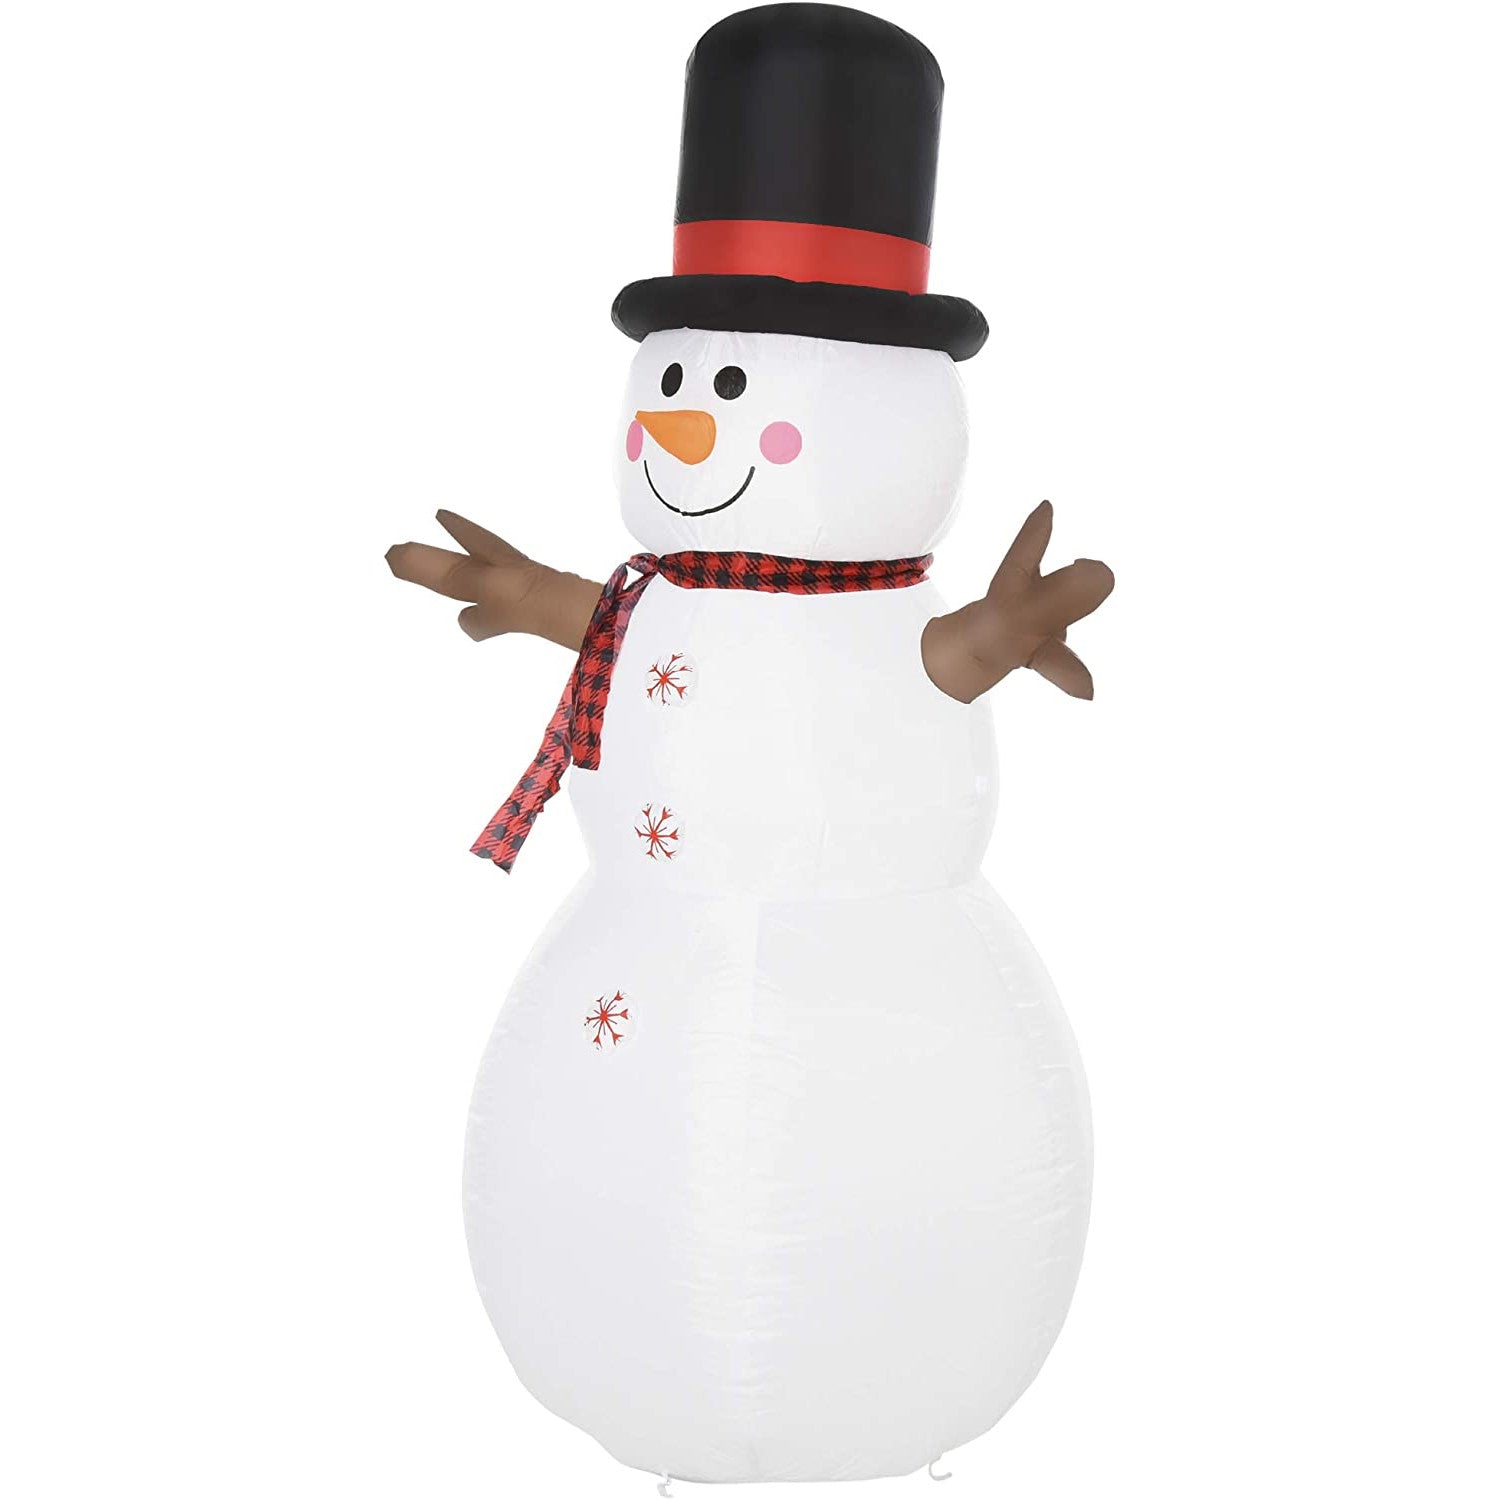 HOMCOM 6ft Giant LED Inflatable Snowman Christmas Outdoor Decoration